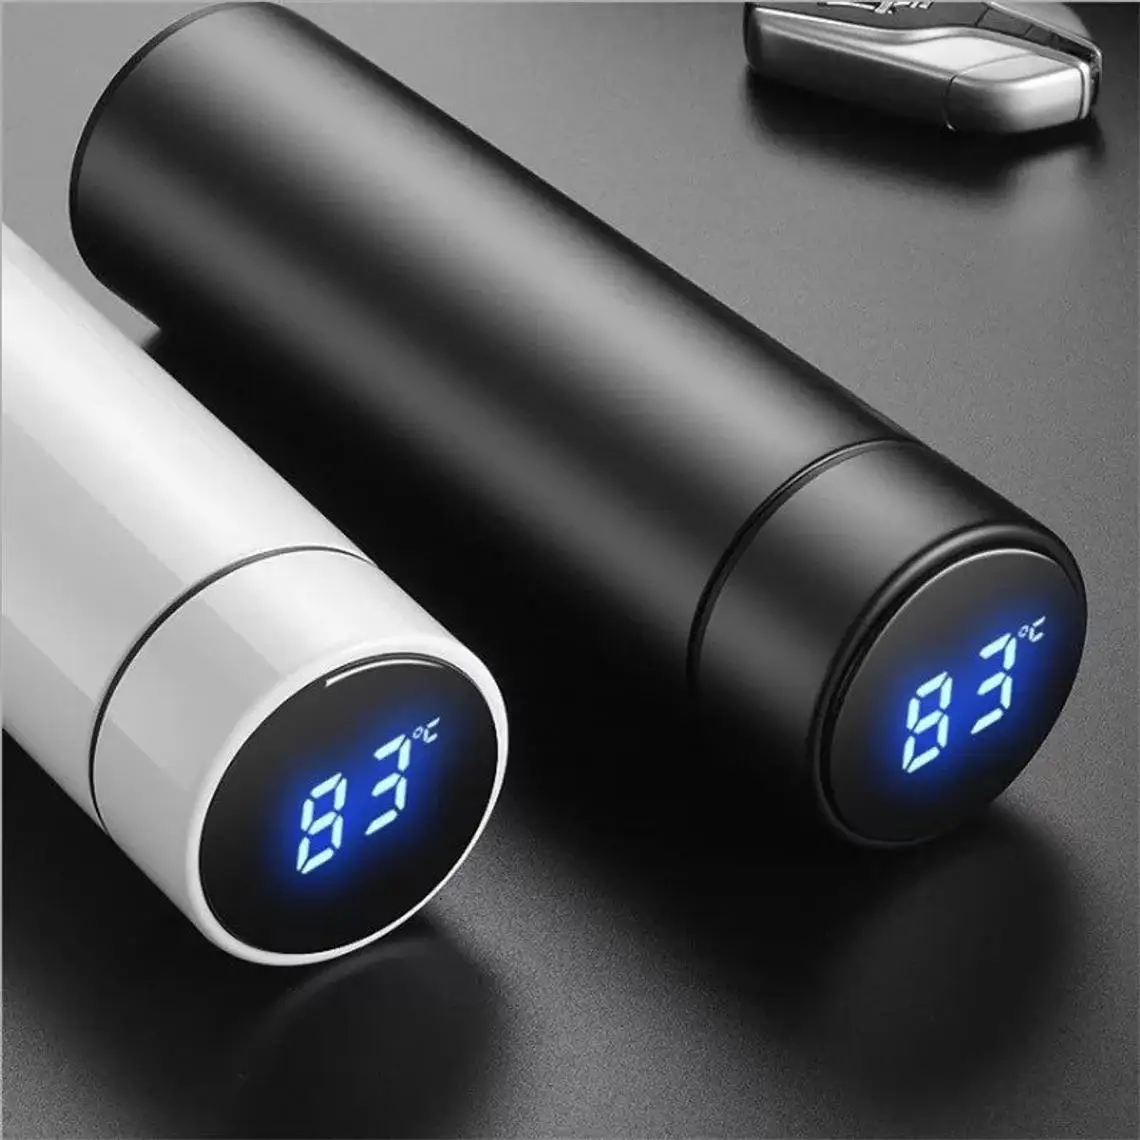 LV 03 Thermal Tumbler LED Touch Display Temperature Stainless Steel Flask  Keep Warm and Cold 500ml